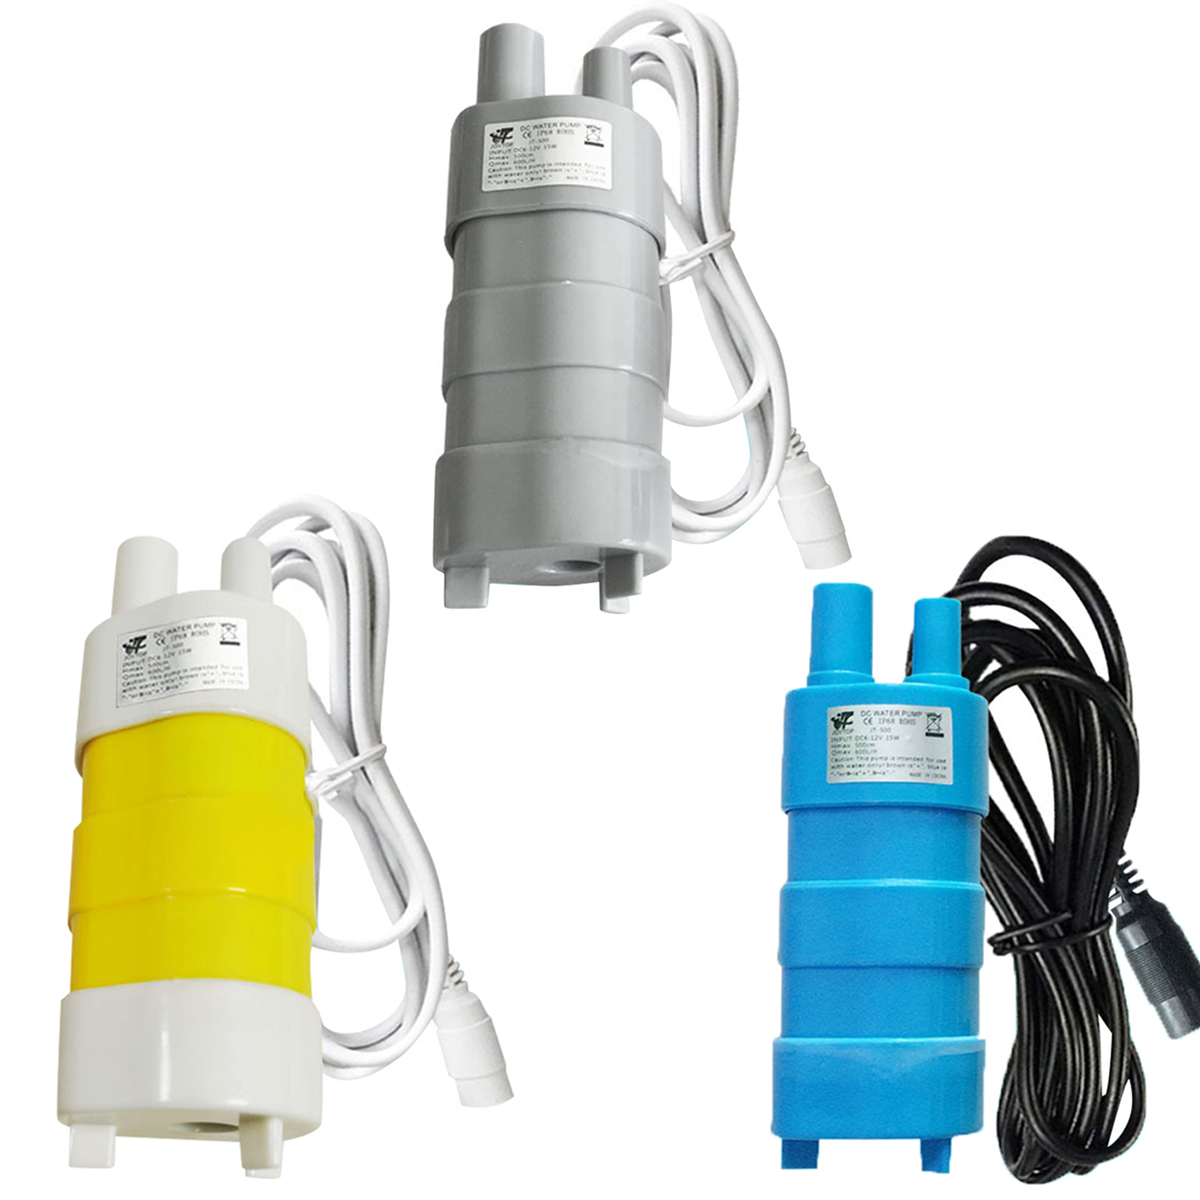 High-Efficiency JT-500 DC 12V Brushless Magnetic Submersible Water Pump 600 L/H Flow 5m Water Head Energy-Saving & Low-Noise Ideal for Fountains and Aquariums